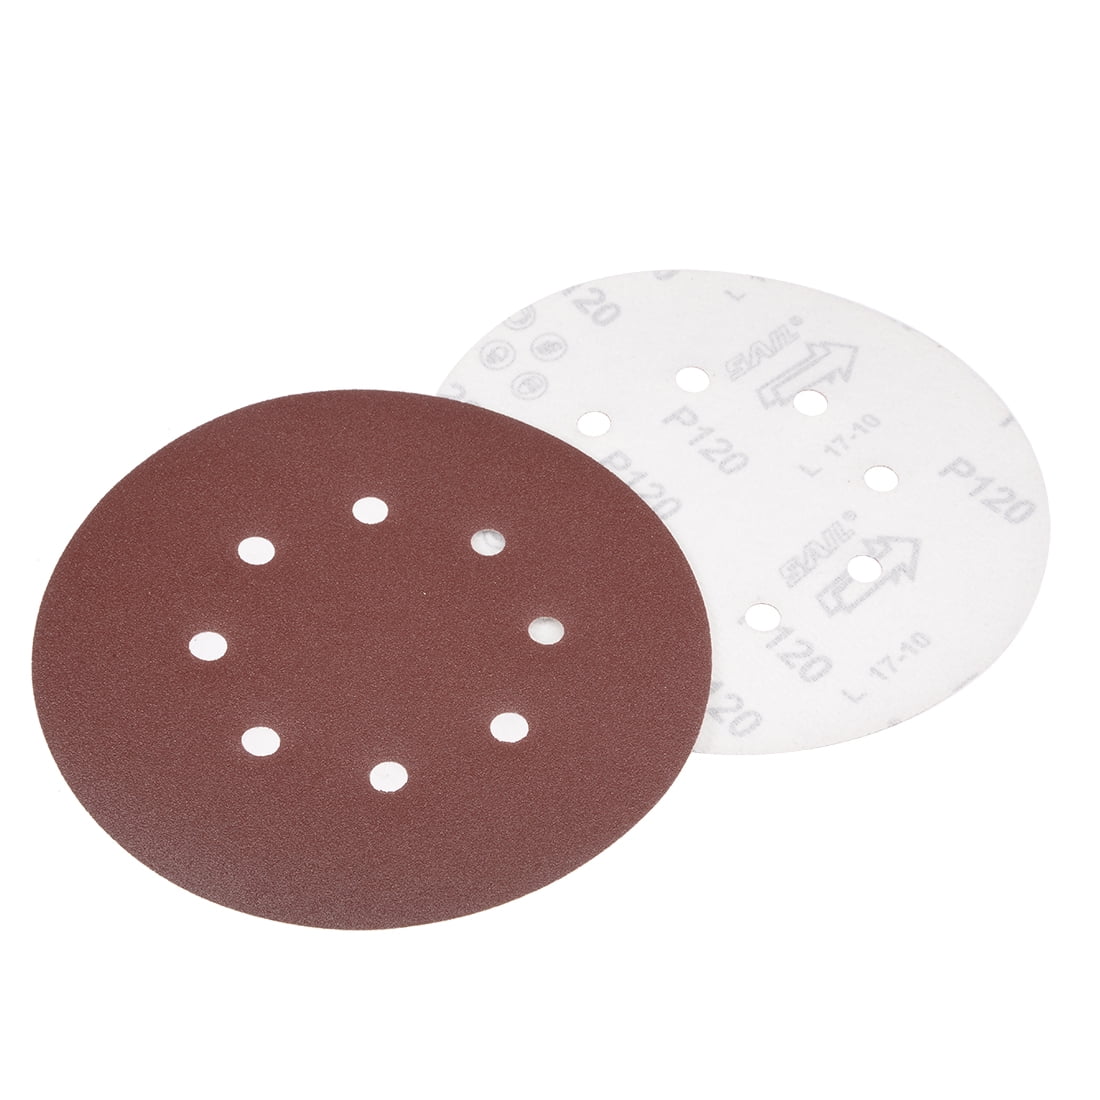 40-5000 Grit 7 Inch Hook And Loop Sand Paper Sanding Disc 180mm Dia Pad Flocking 